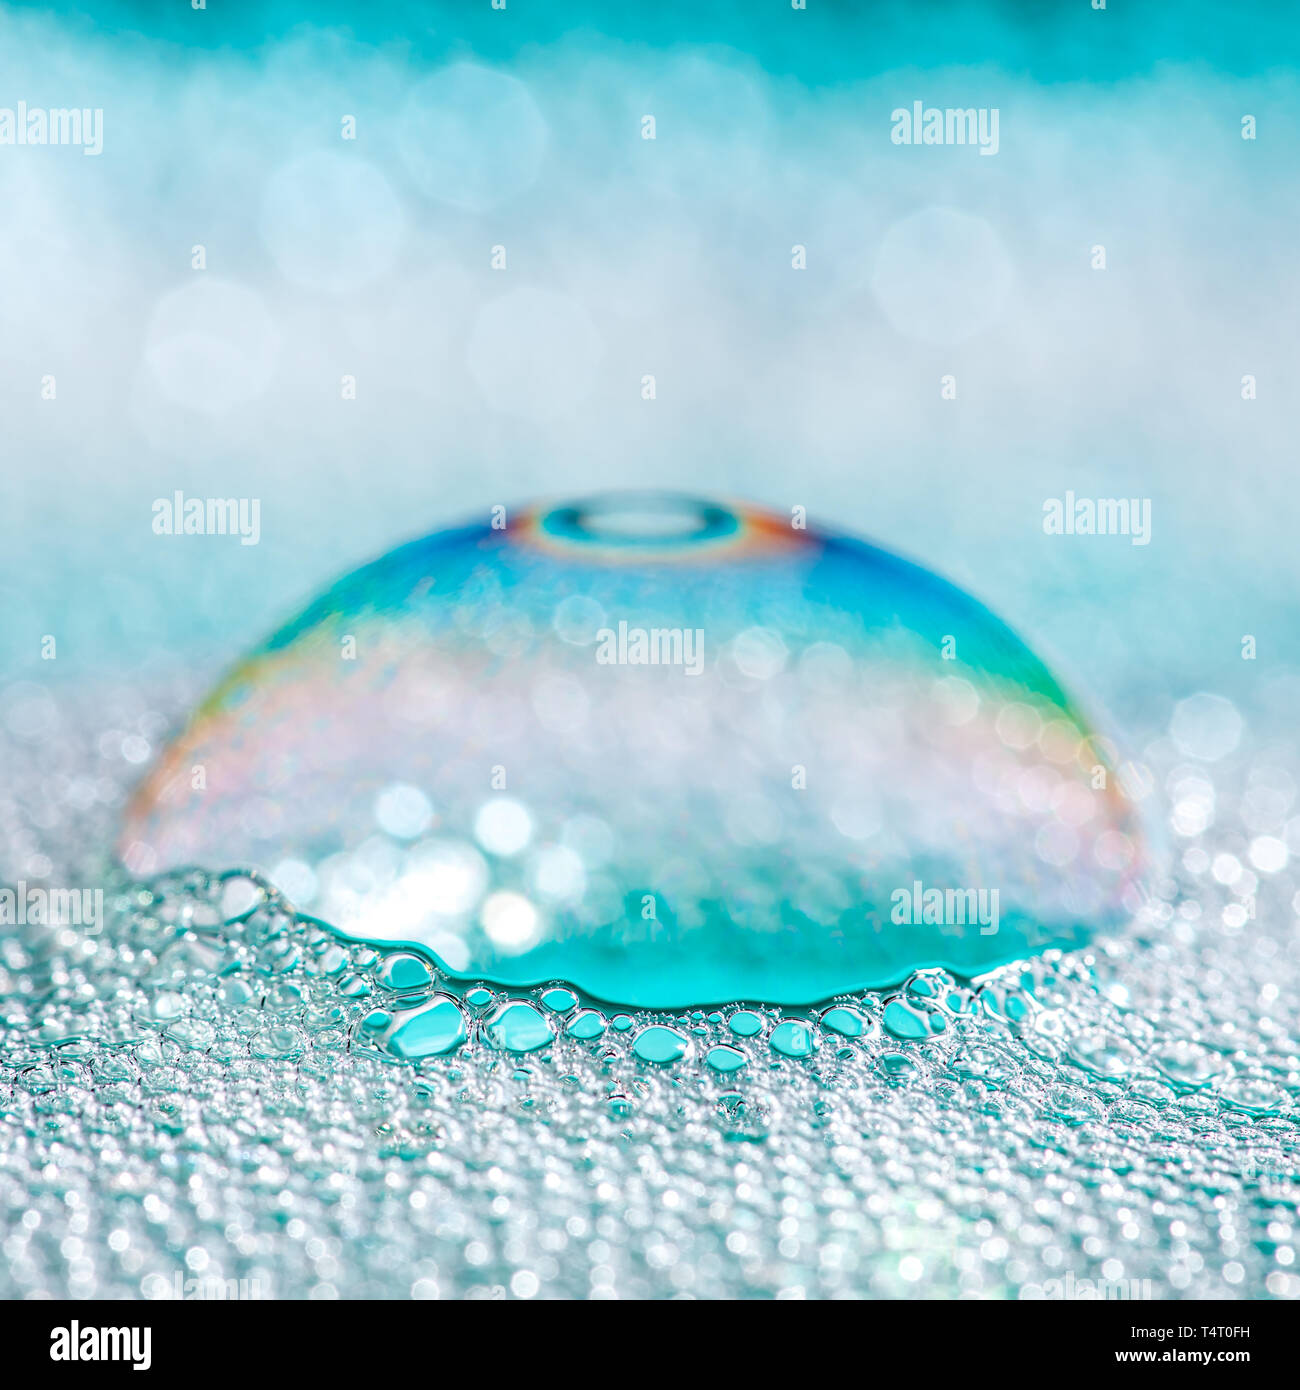 Clean blue soap bubbles and suds Stock Photo